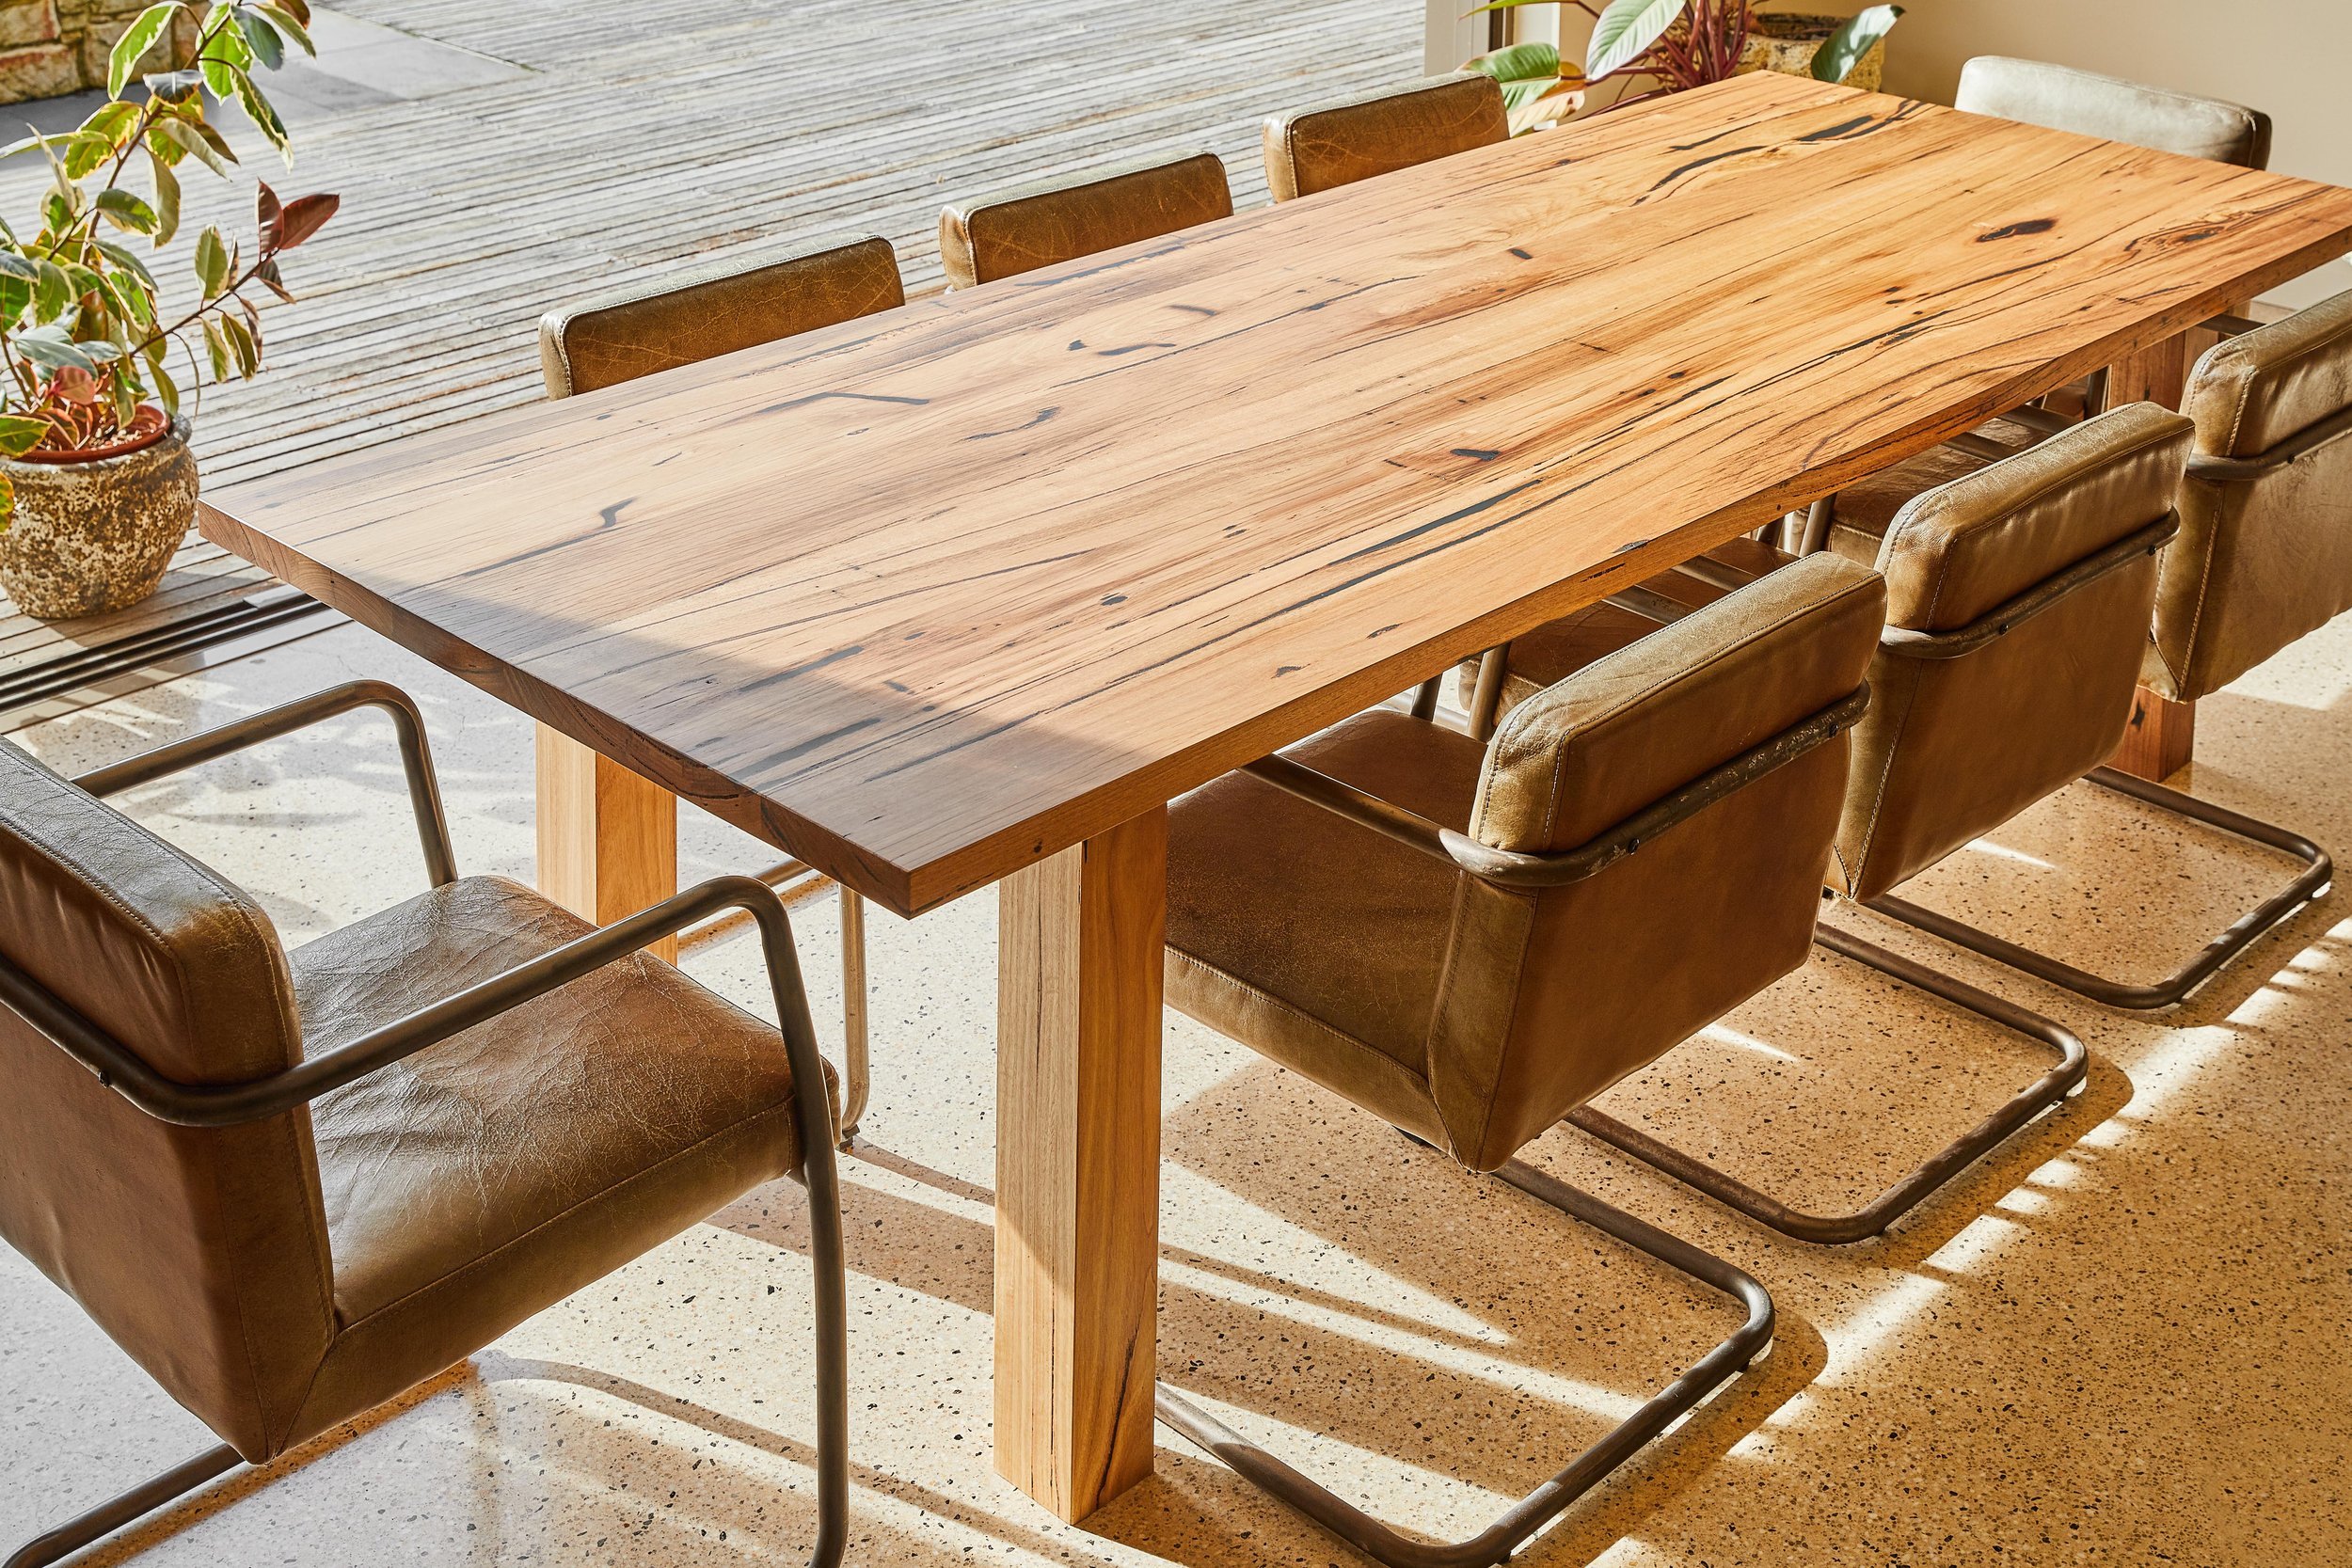 Sustainable Messmate timber dining table